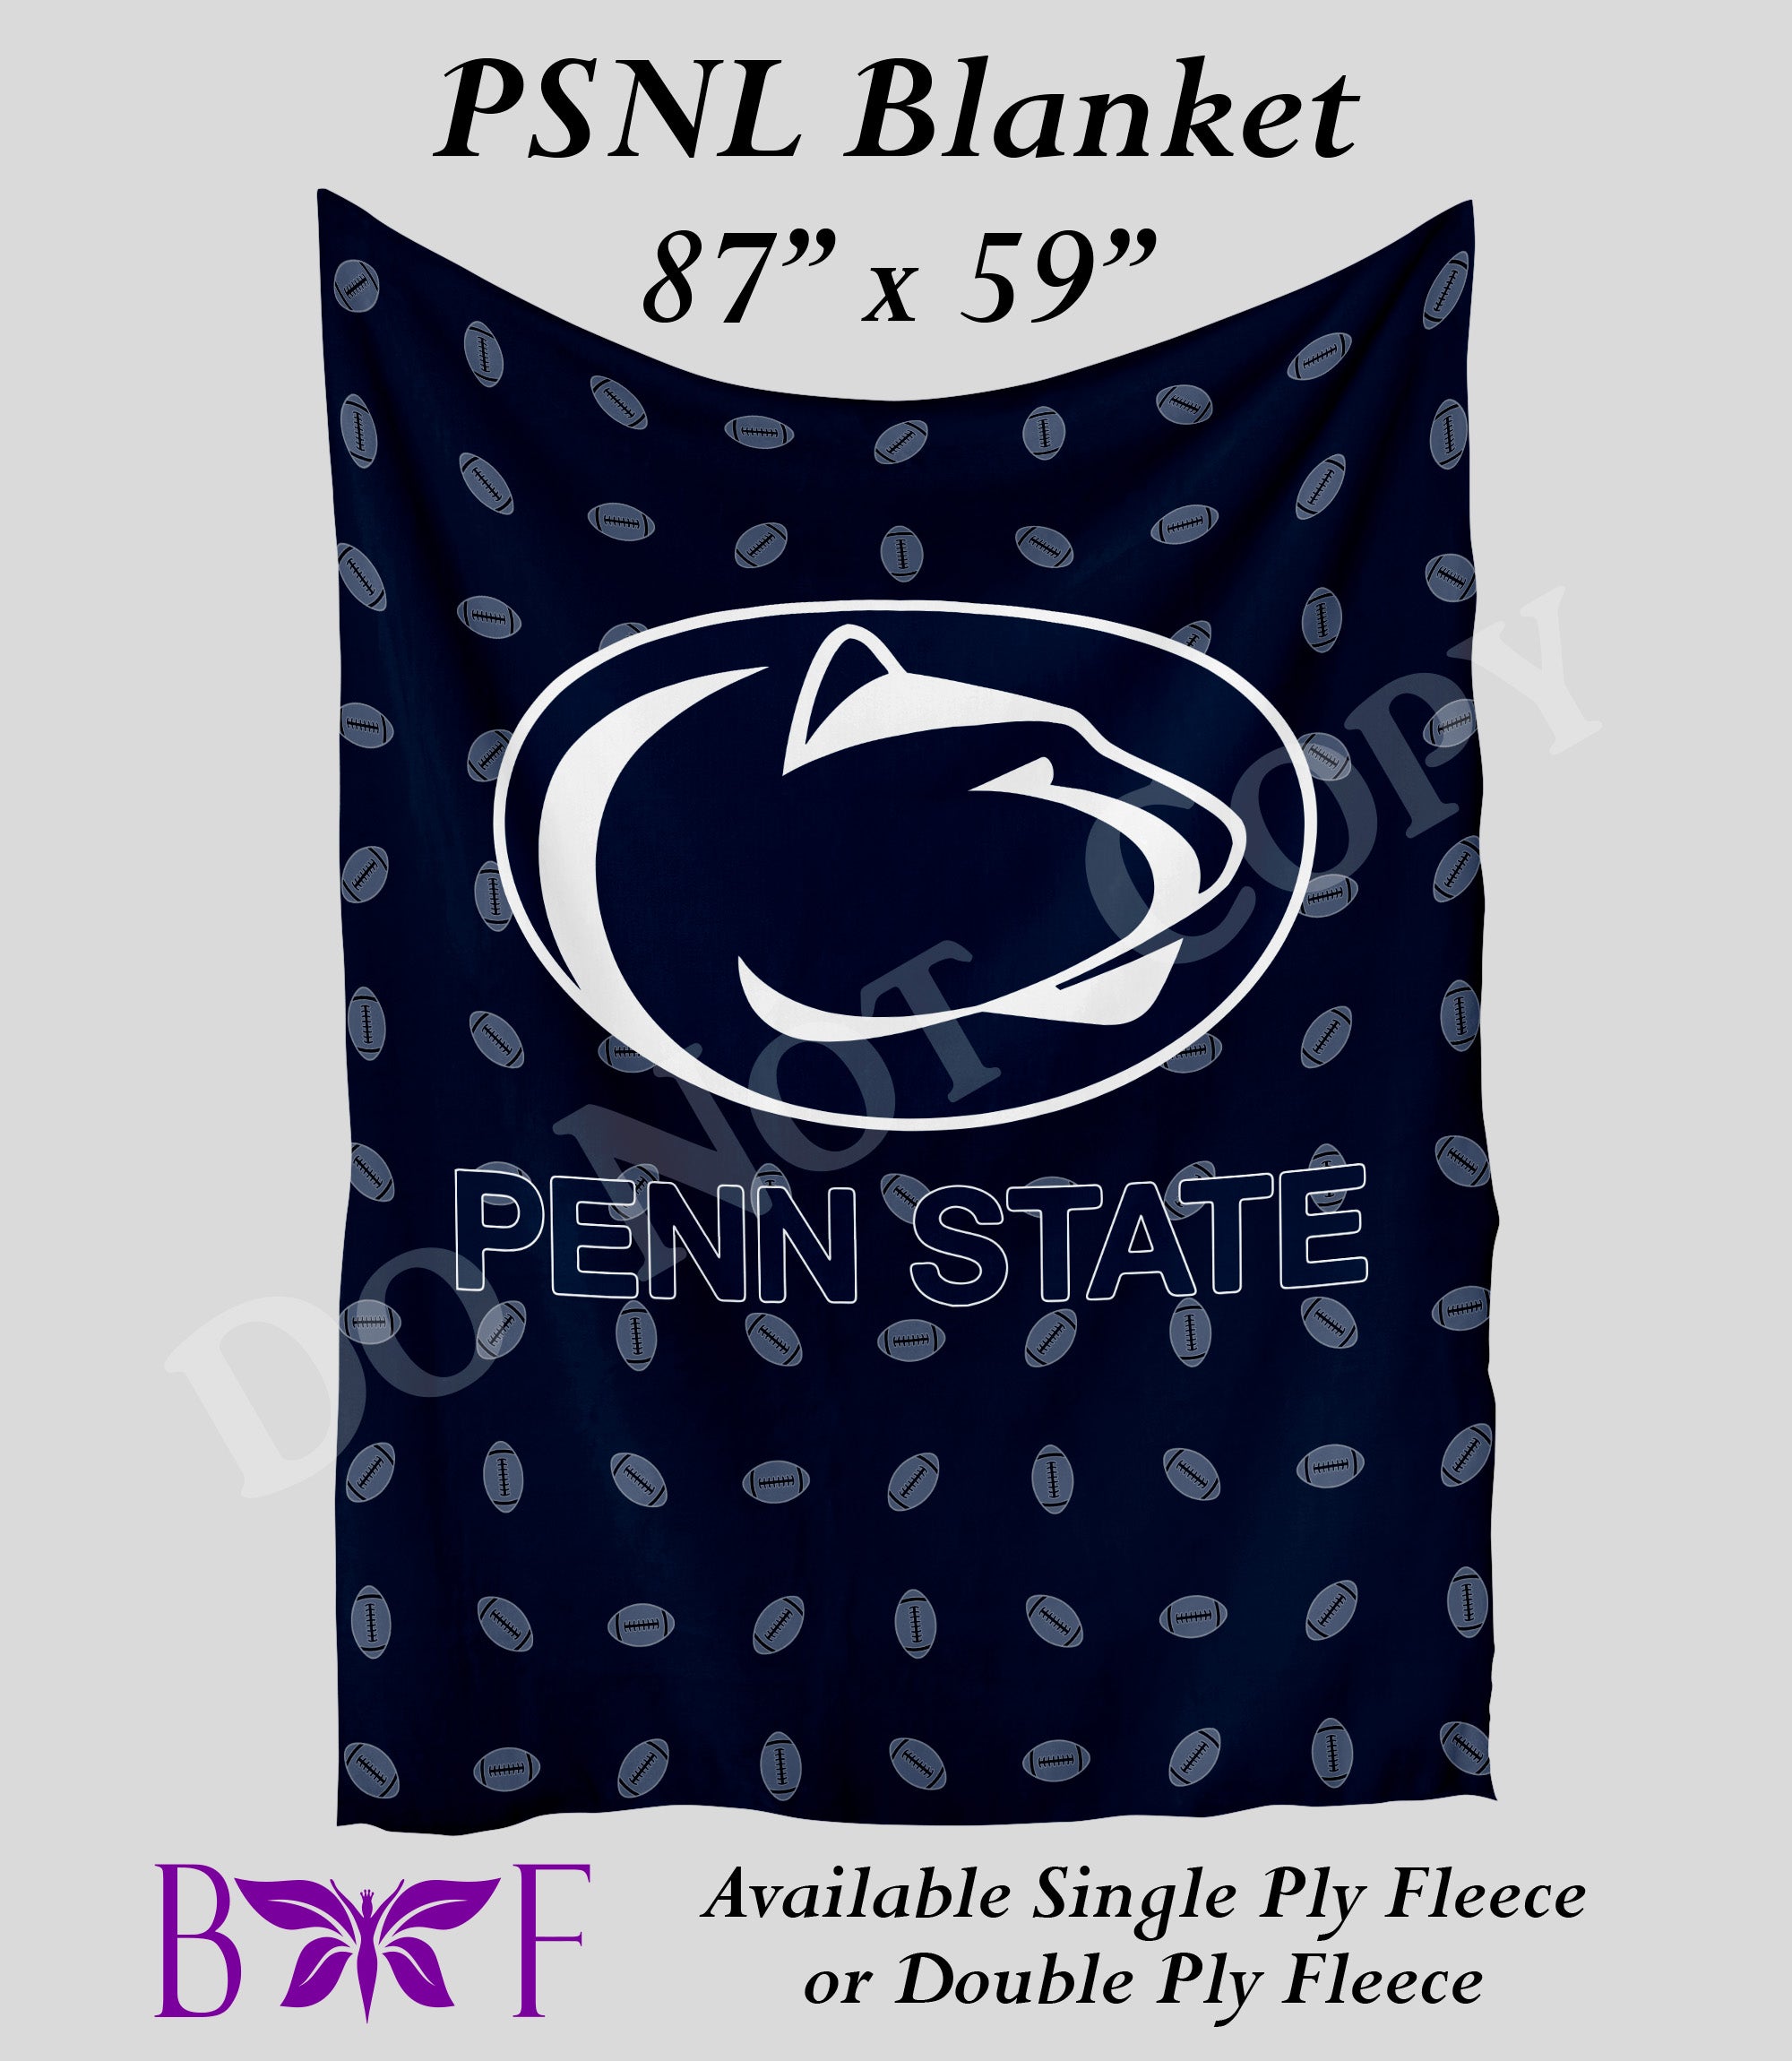 PSNL 59"x87" soft blanket also available with sherpa fleece